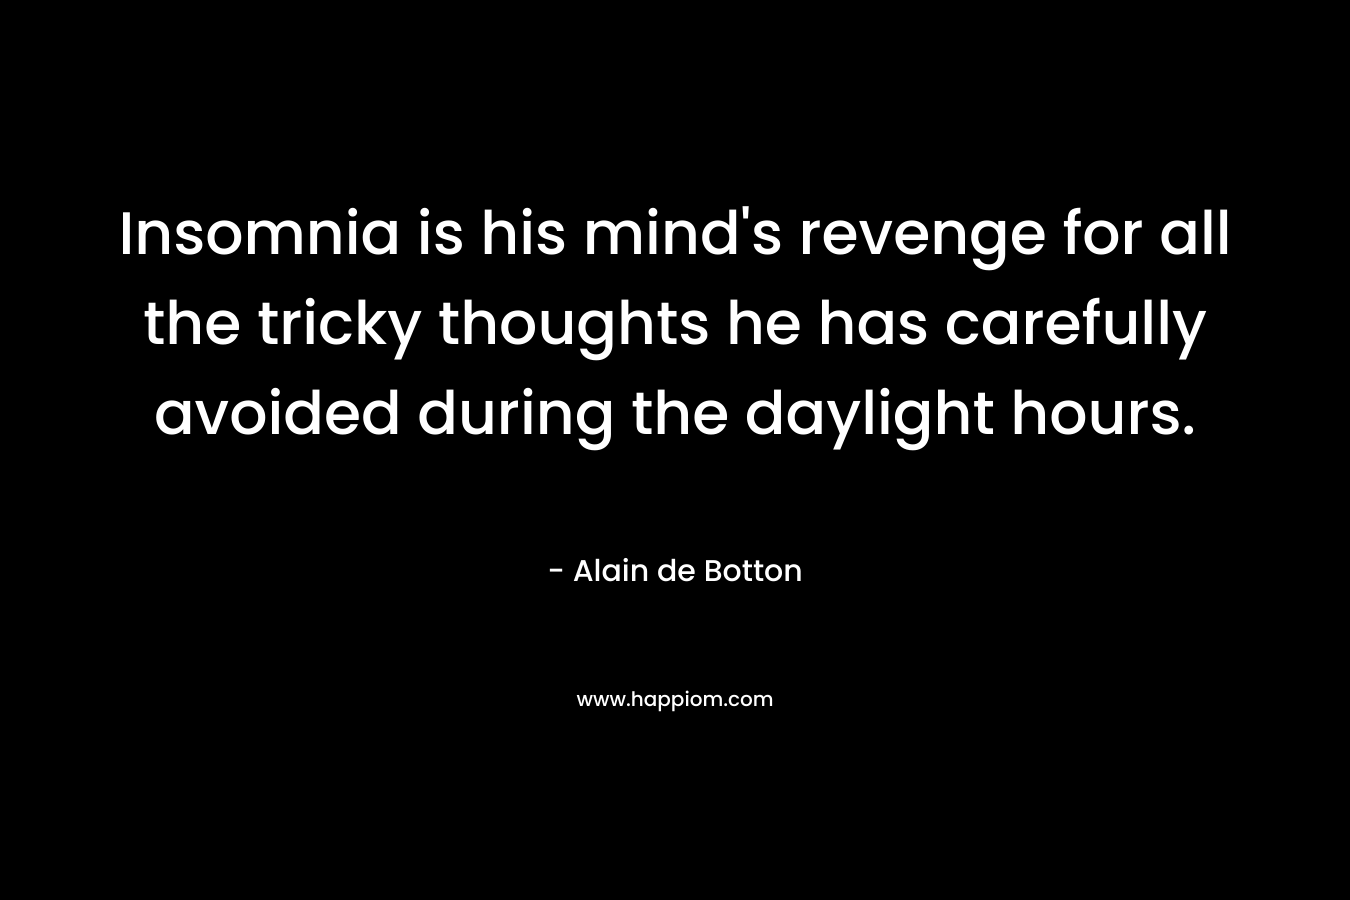 Insomnia is his mind's revenge for all the tricky thoughts he has carefully avoided during the daylight hours.